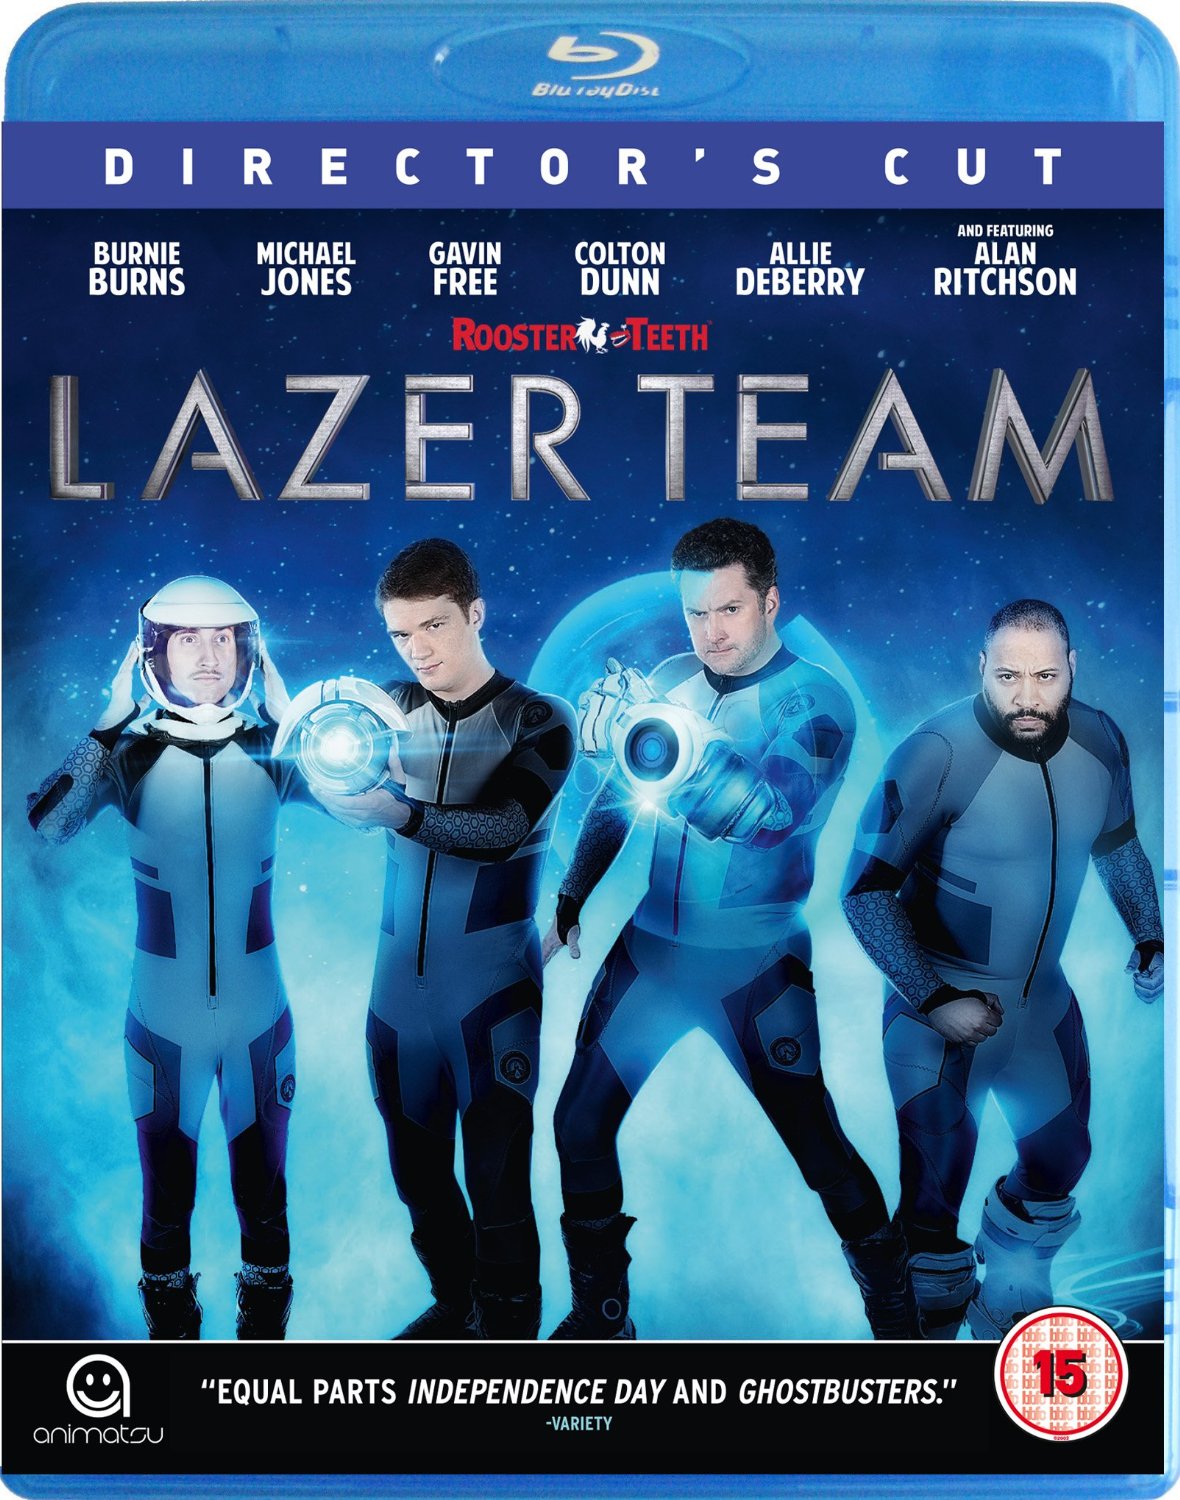 Lazer Team Blu-ray review: Earth’s amatuer heroes